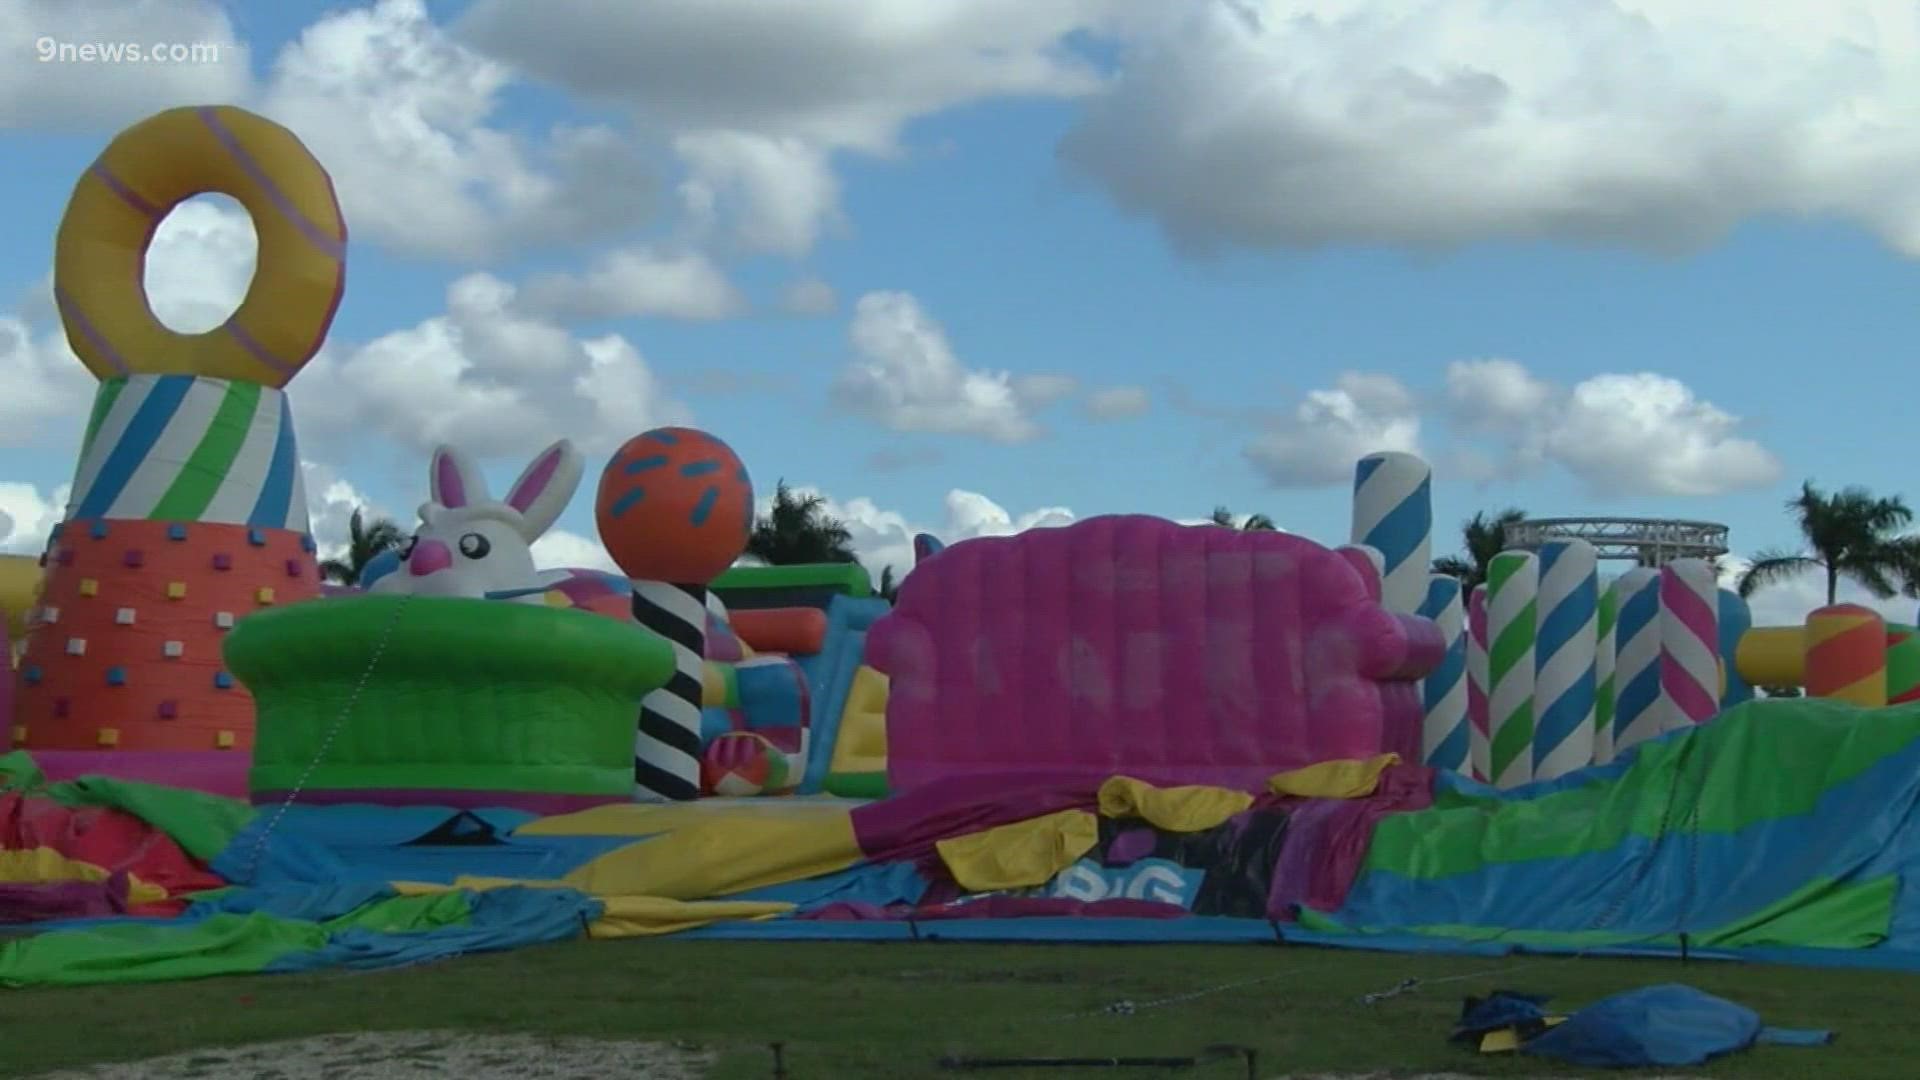 Big Bounce America is on tour across the country, and made a weekend stop in Sarasota, Florida.